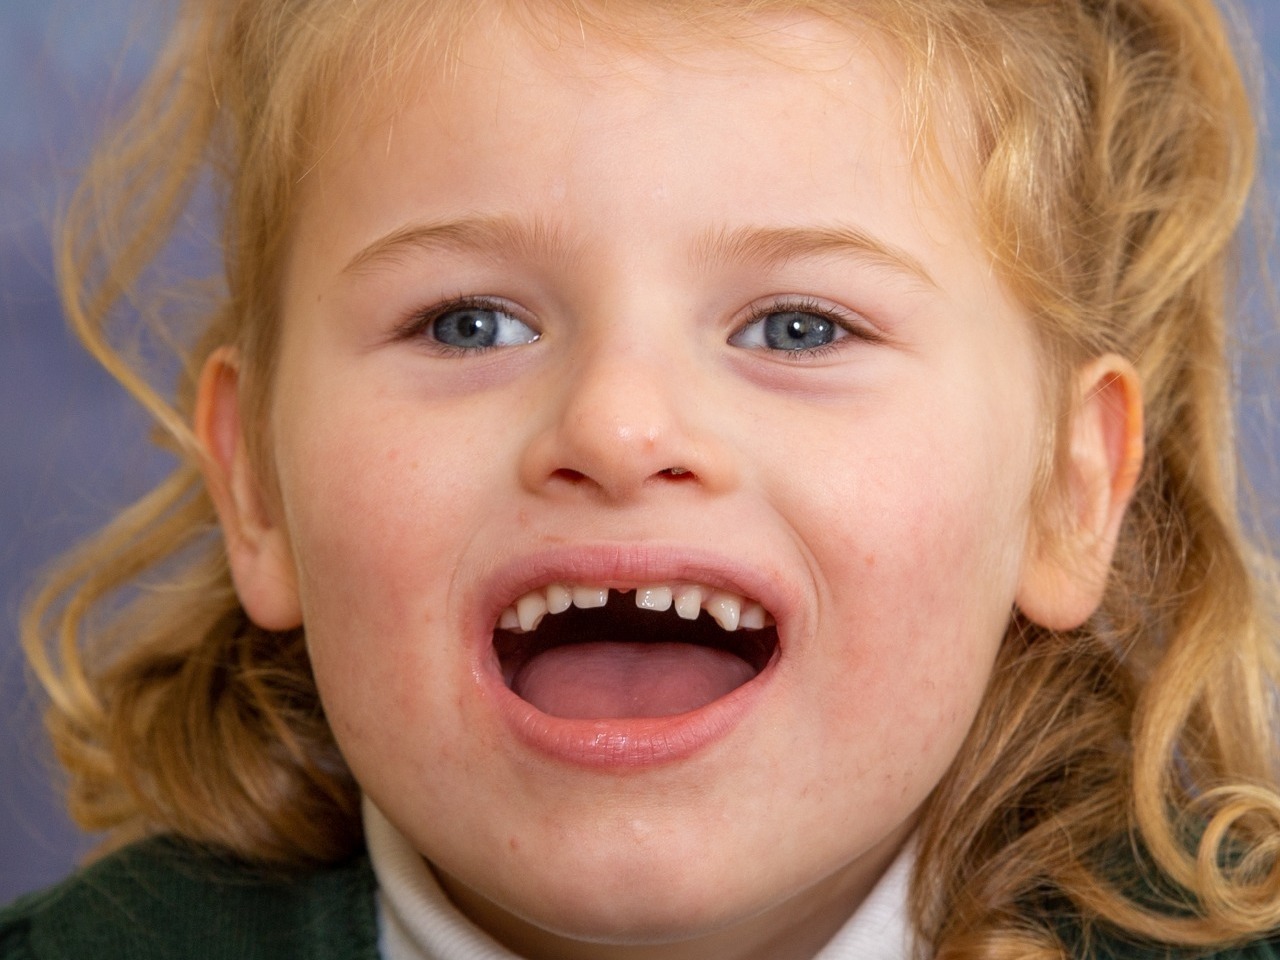 Pretty little girl with autism having her school photograph taken